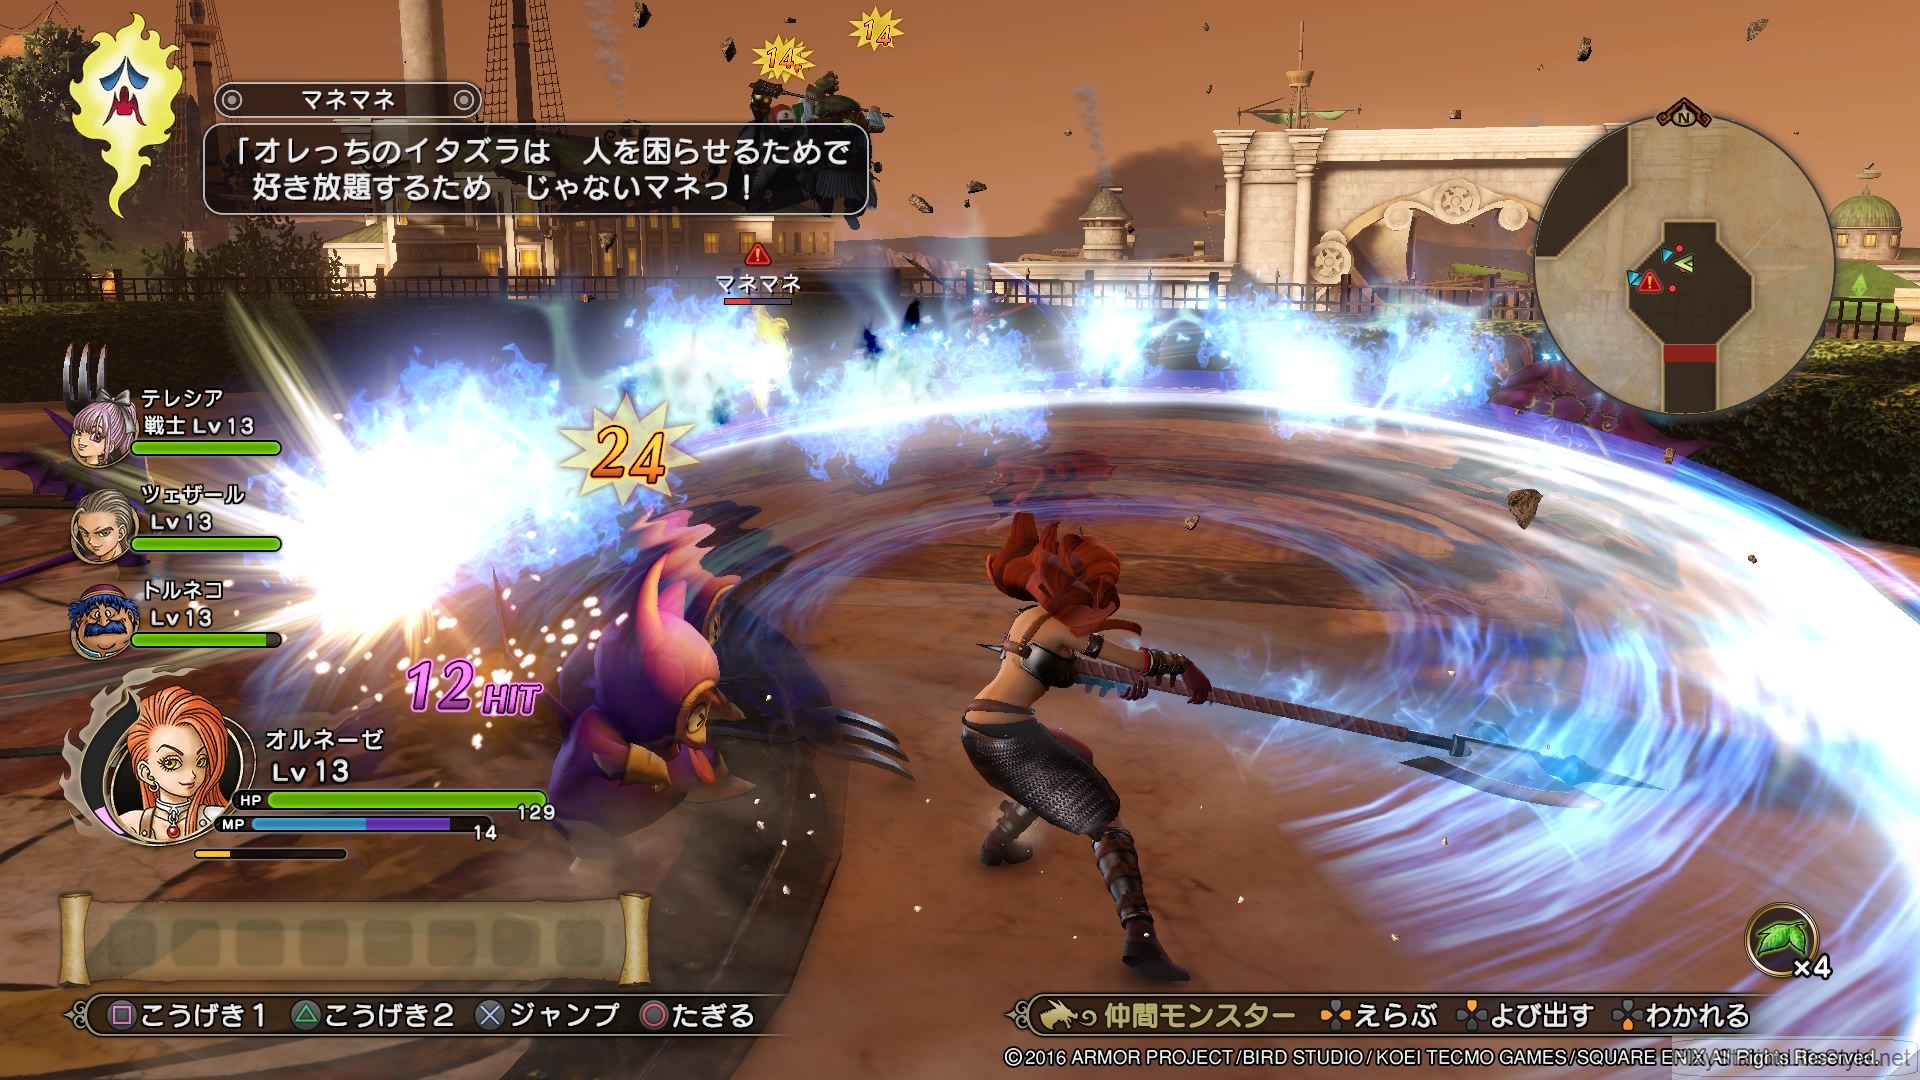 Release Date Confirmed for Dragon Quest Heroes 2 - mxdwn Games